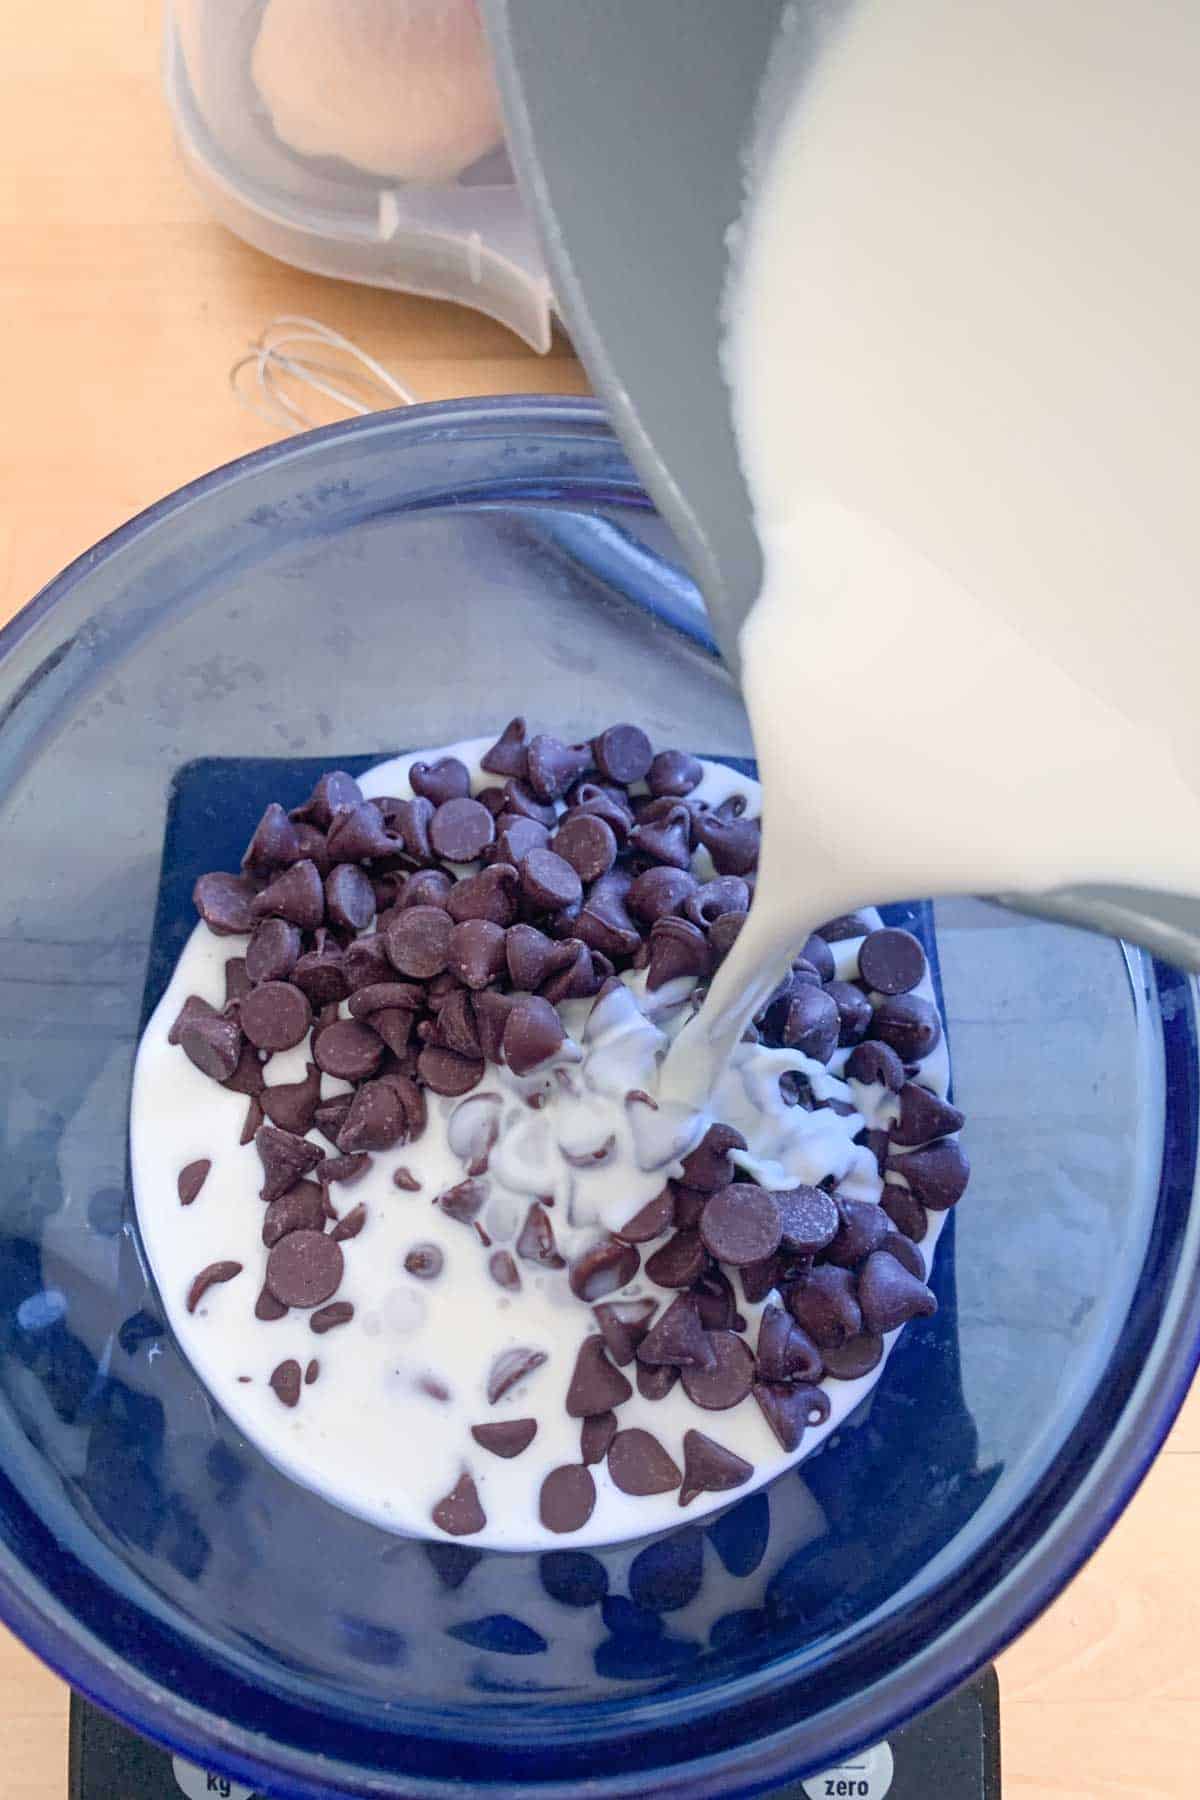 pouring cream over chocolate chips for ganache